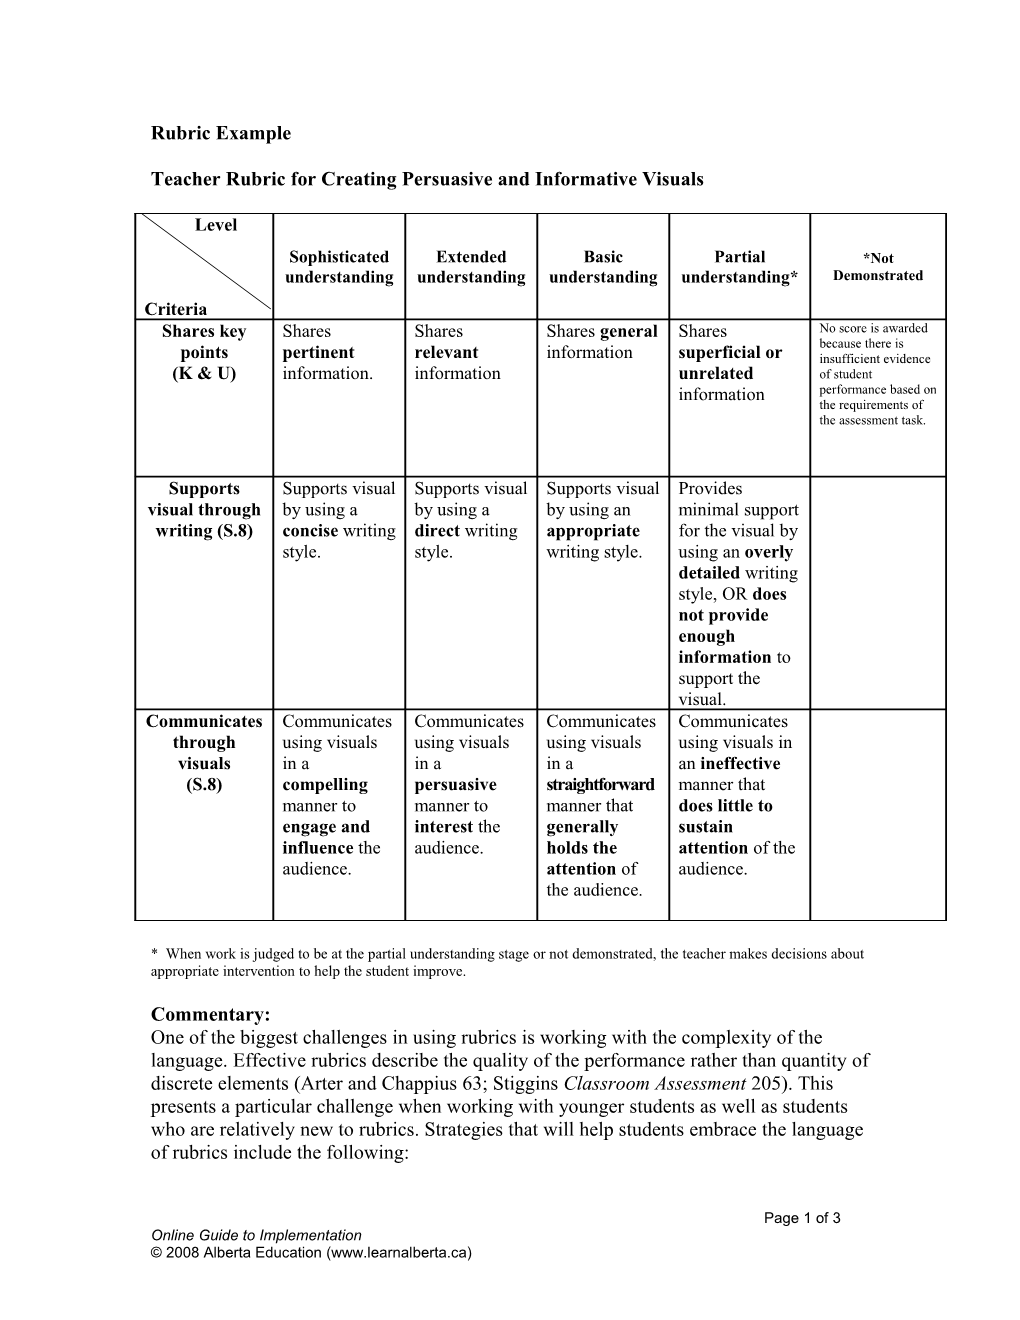 Teacher Rubric for Creating Persuasive and Informative Visuals